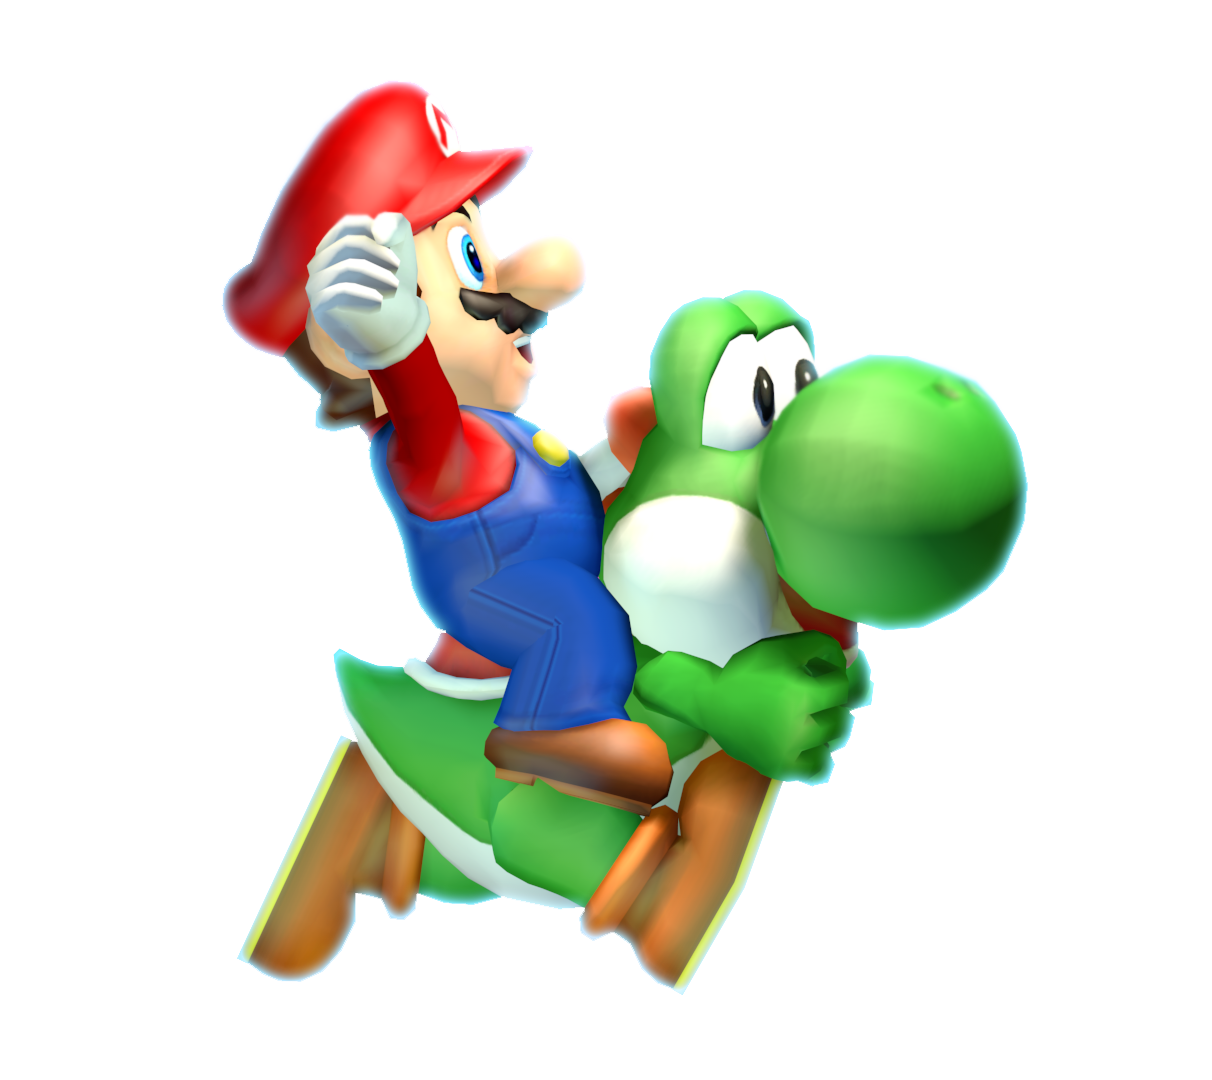 Cinema 4D Render] Ride on-a my Yoshi! by MaxiGamer on DeviantArt